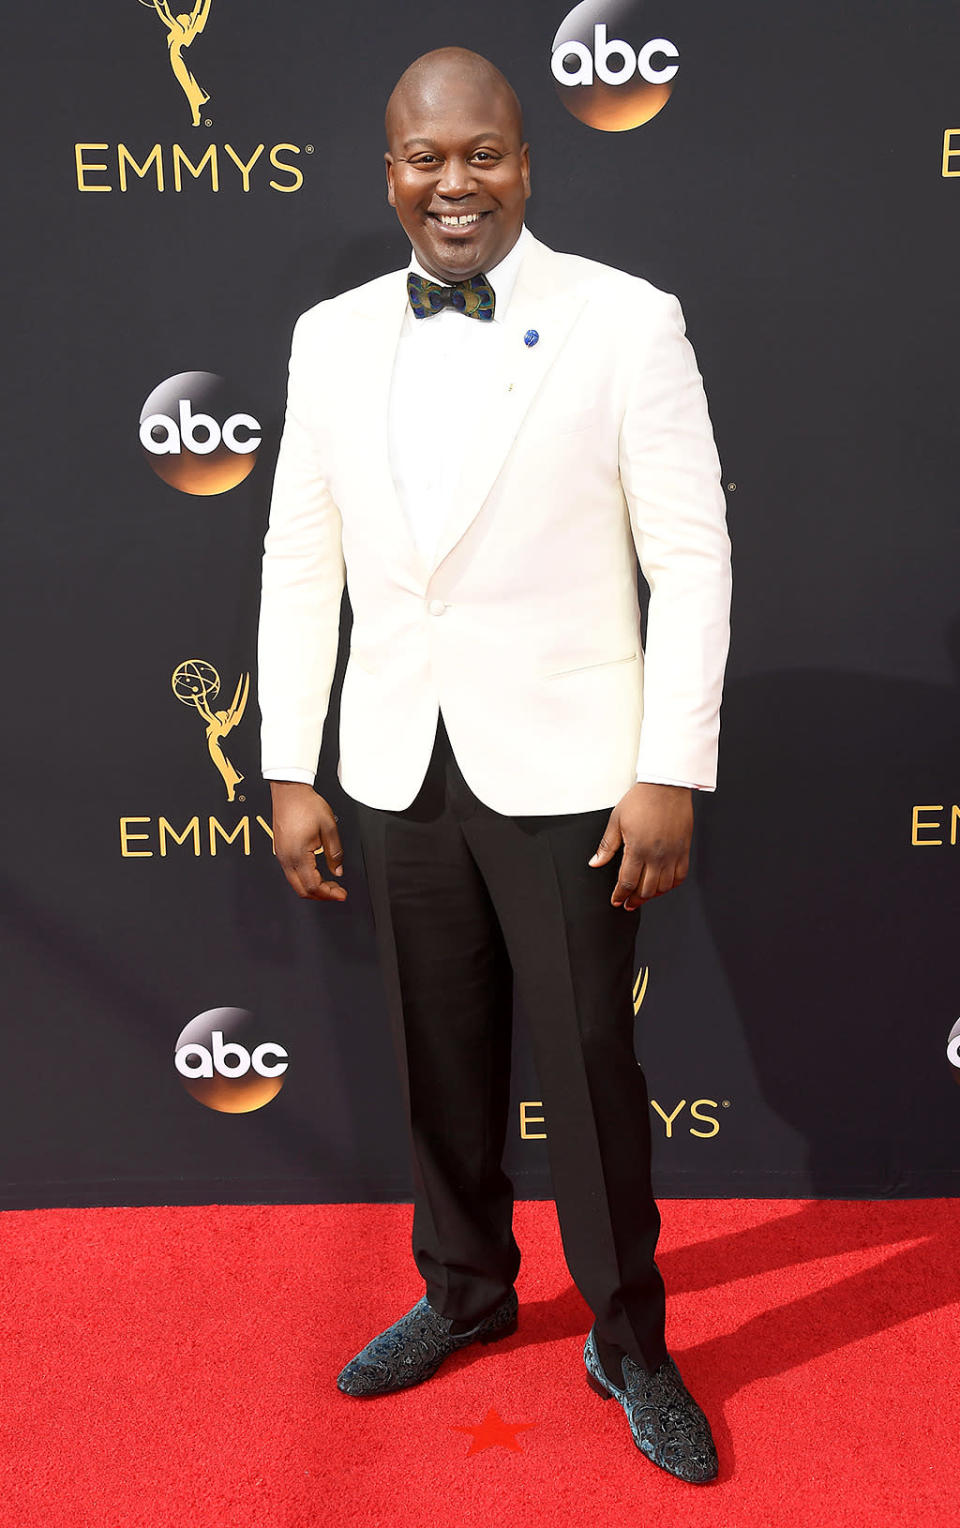 <p>Tituss Burgess arrives at the 68th Emmy Awards at the Microsoft Theater on September 18, 2016 in Los Angeles, Calif. (Photo by Getty Images)</p>